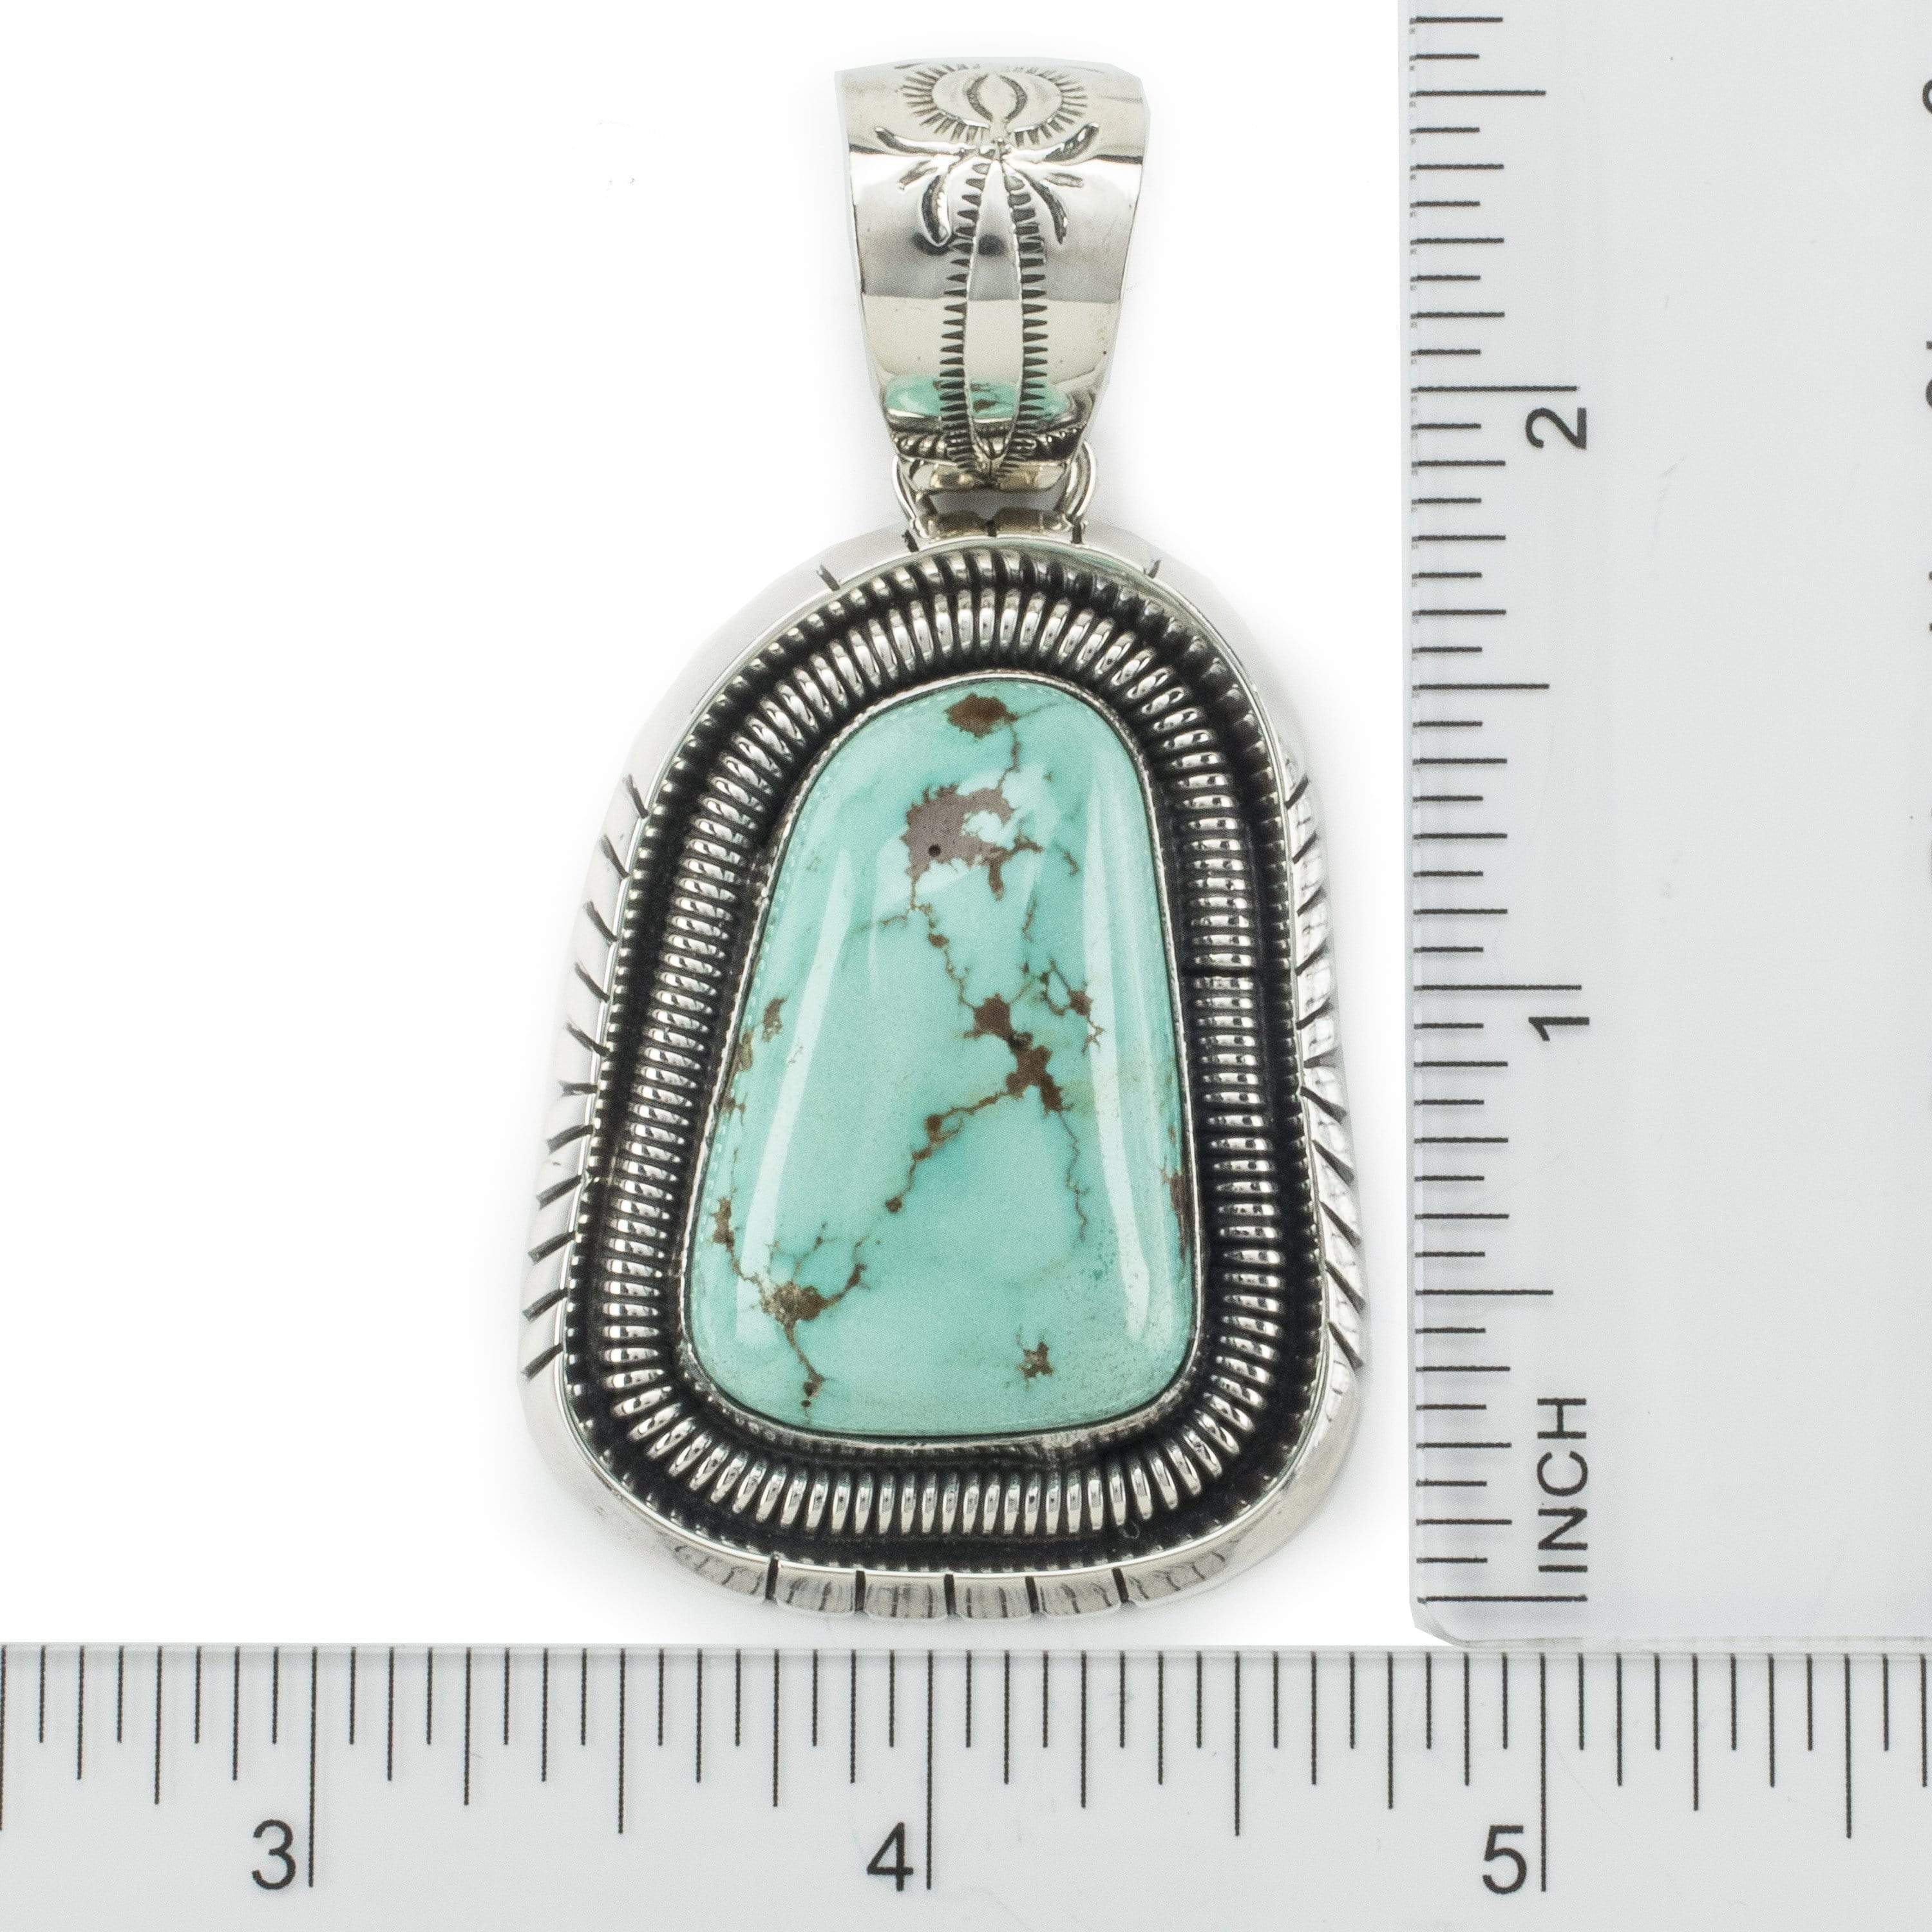 Kalifano Native American Jewelry L. Juan Campitos Turquoise USA Native American Made 925 Sterling Silver Pendant NAN2200.003